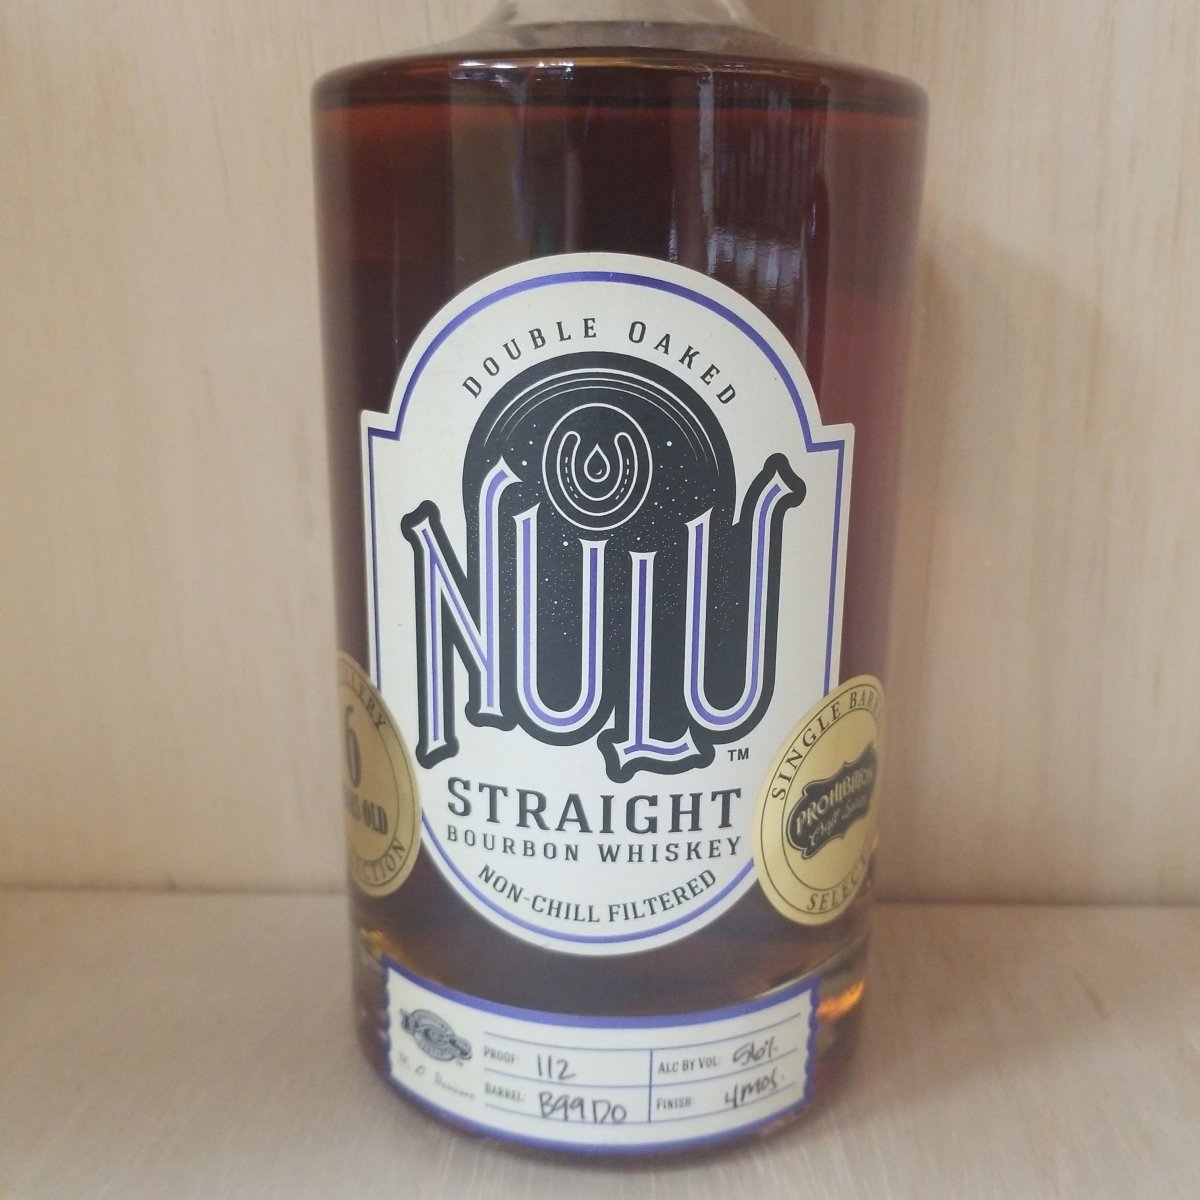 Nulo Double Oaked Straight Bourbon 750ml (Barrel B99DO, proof 112) - Sip &amp; Say